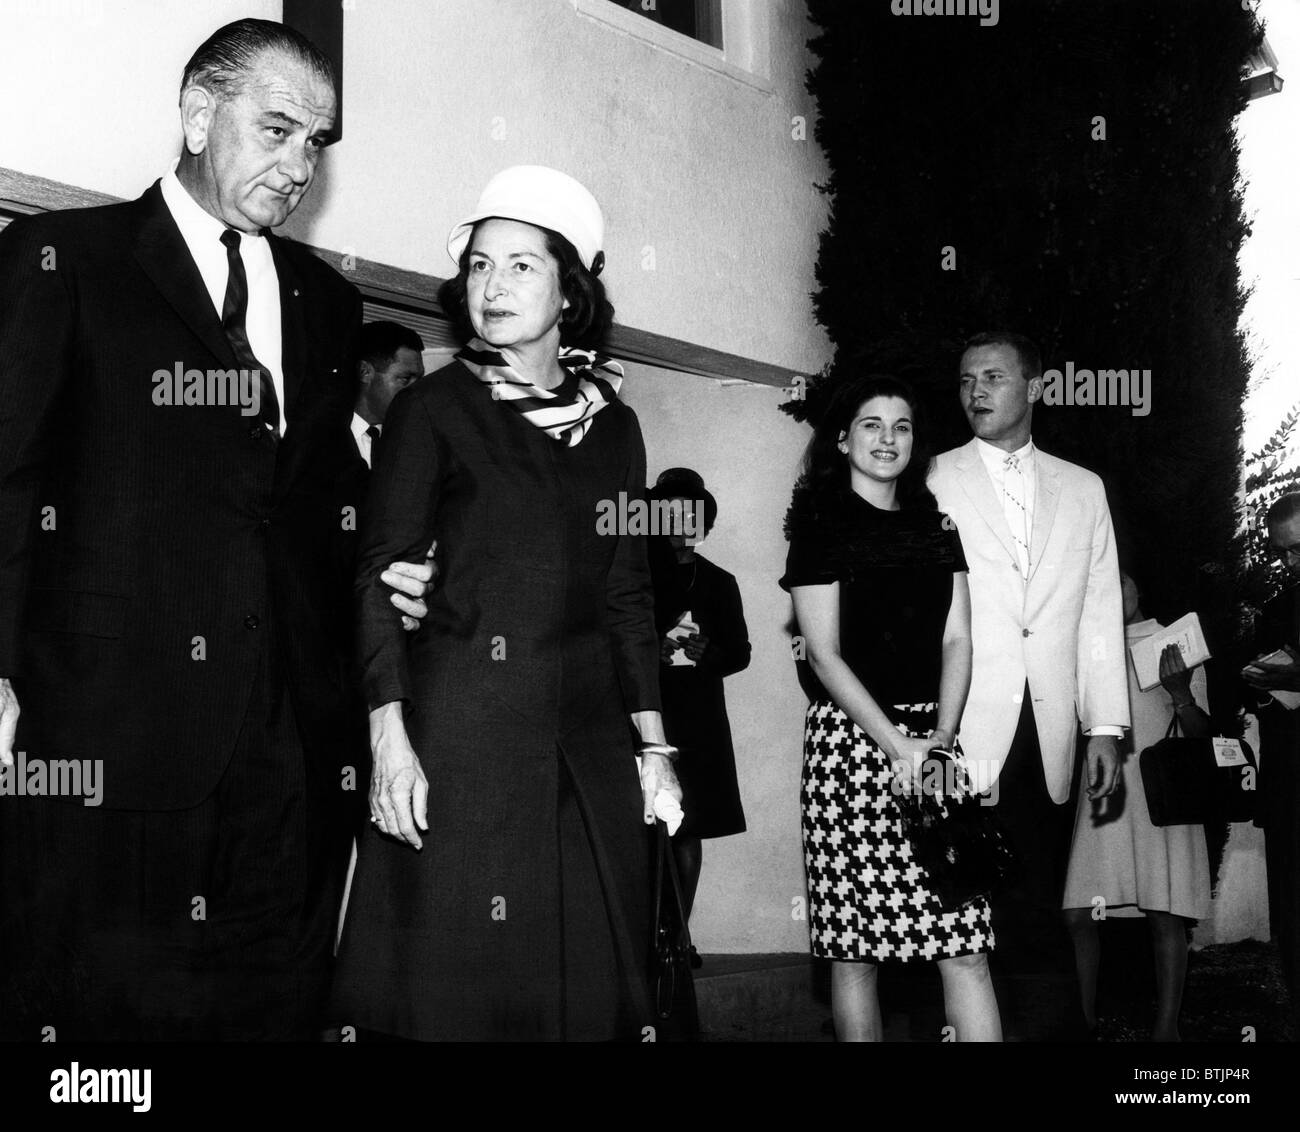 President and Mrs Johnson Johnson, leave church along with her daughter Luci and her husband Pat Nugent. October 9, 1966. Courte Stock Photo